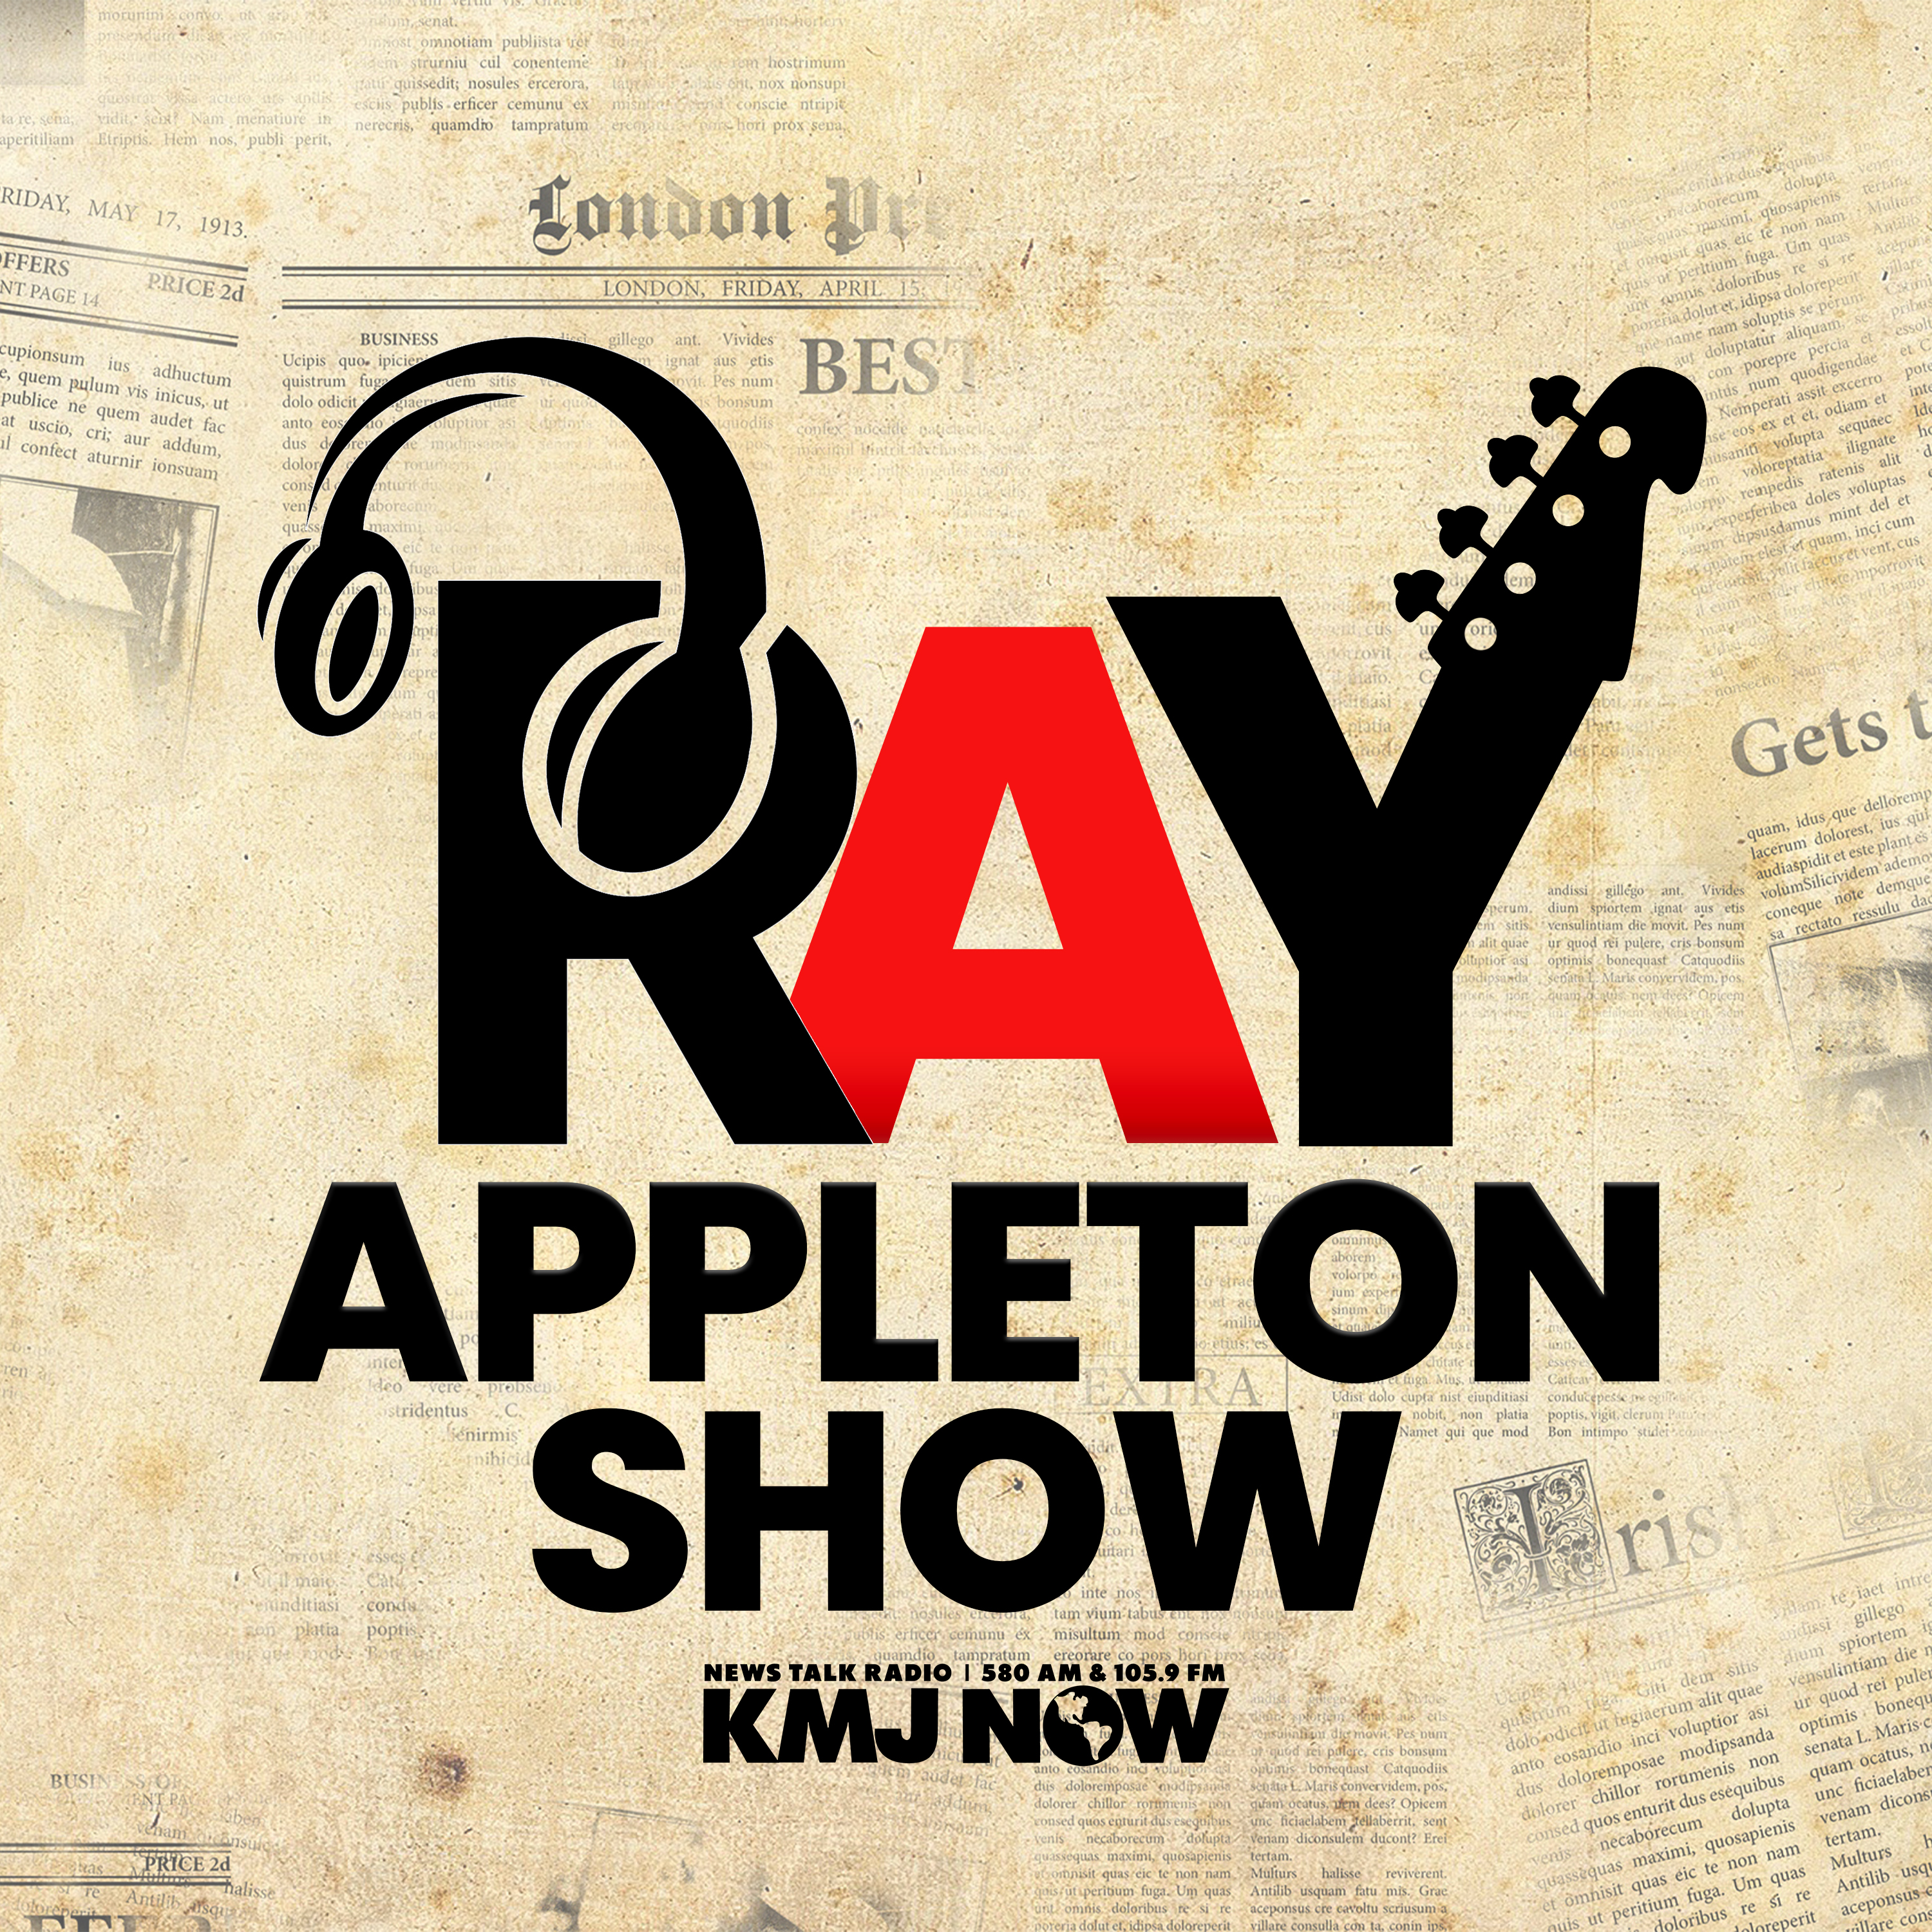 Rocky Pipkin & Leah King Join The Show